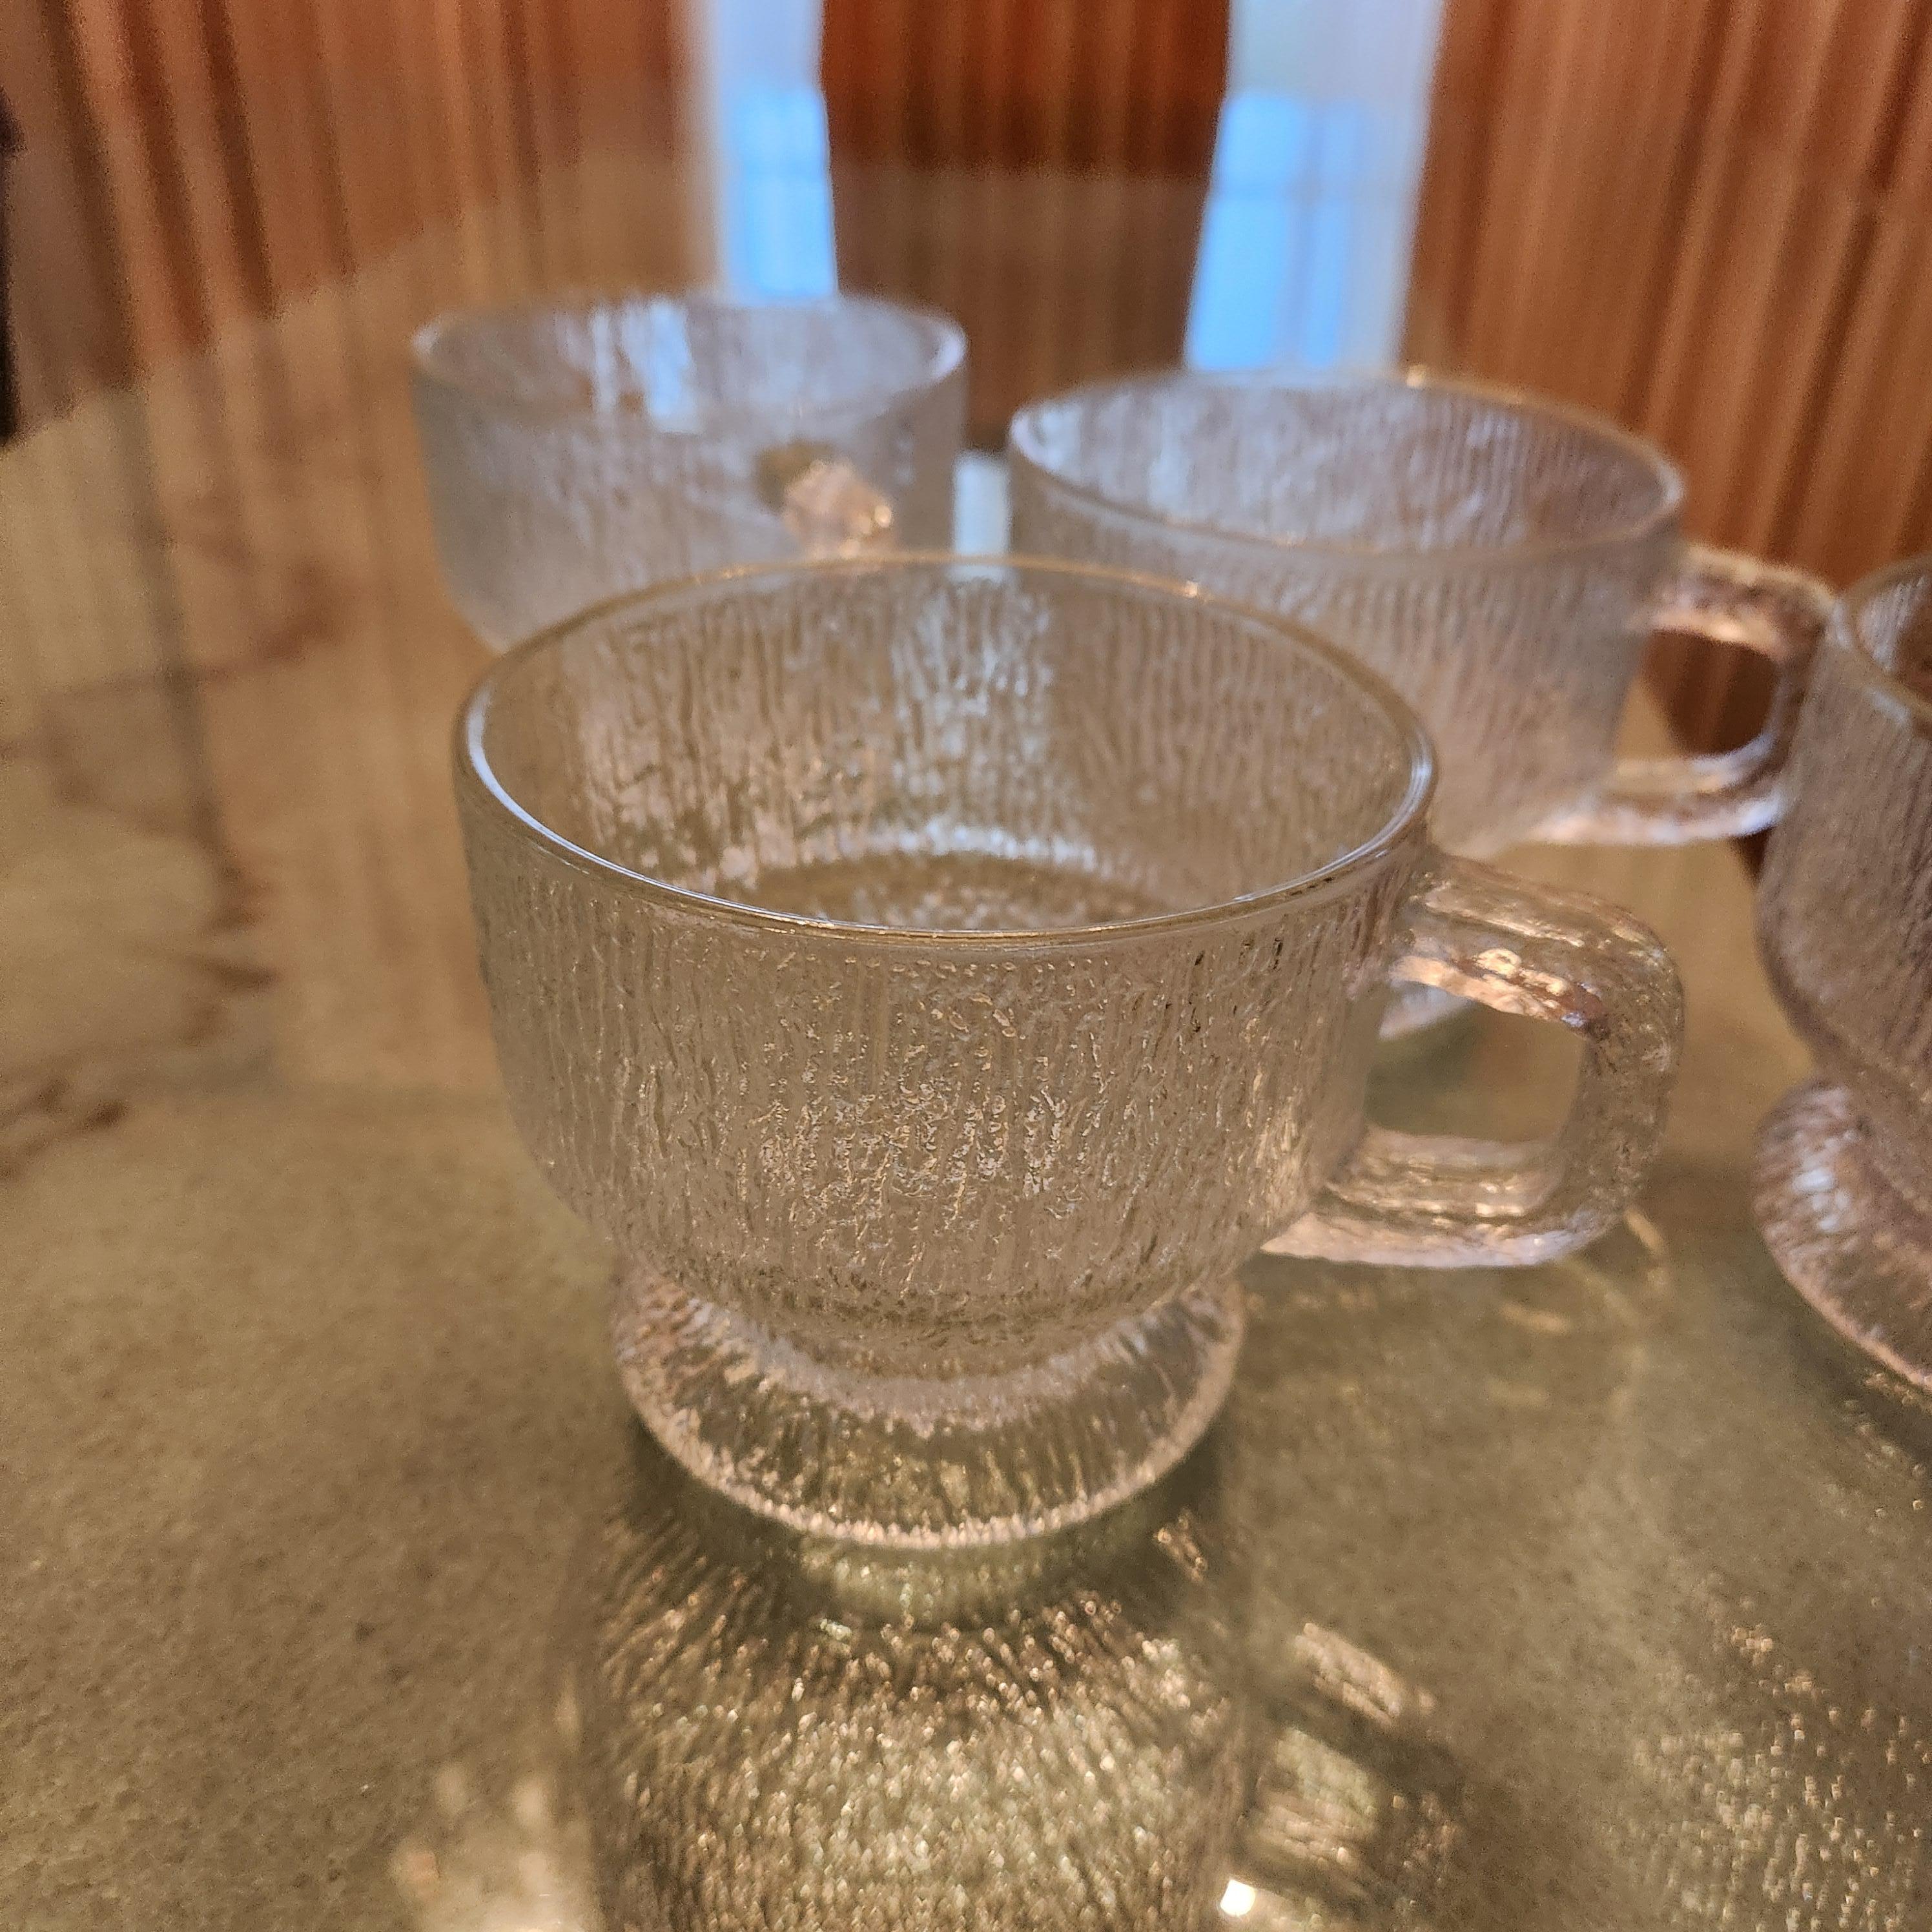 Vintage Scandinavian Frosted Ice Glass Mugs Set of Four
Frosted glass style of Tapio Wirkkala for IITTALA. Ultima Thule, Finland.
No label 3.38 H x 5 D x 4 in diameter
Original preowned vintage condition. 
Please review all images.